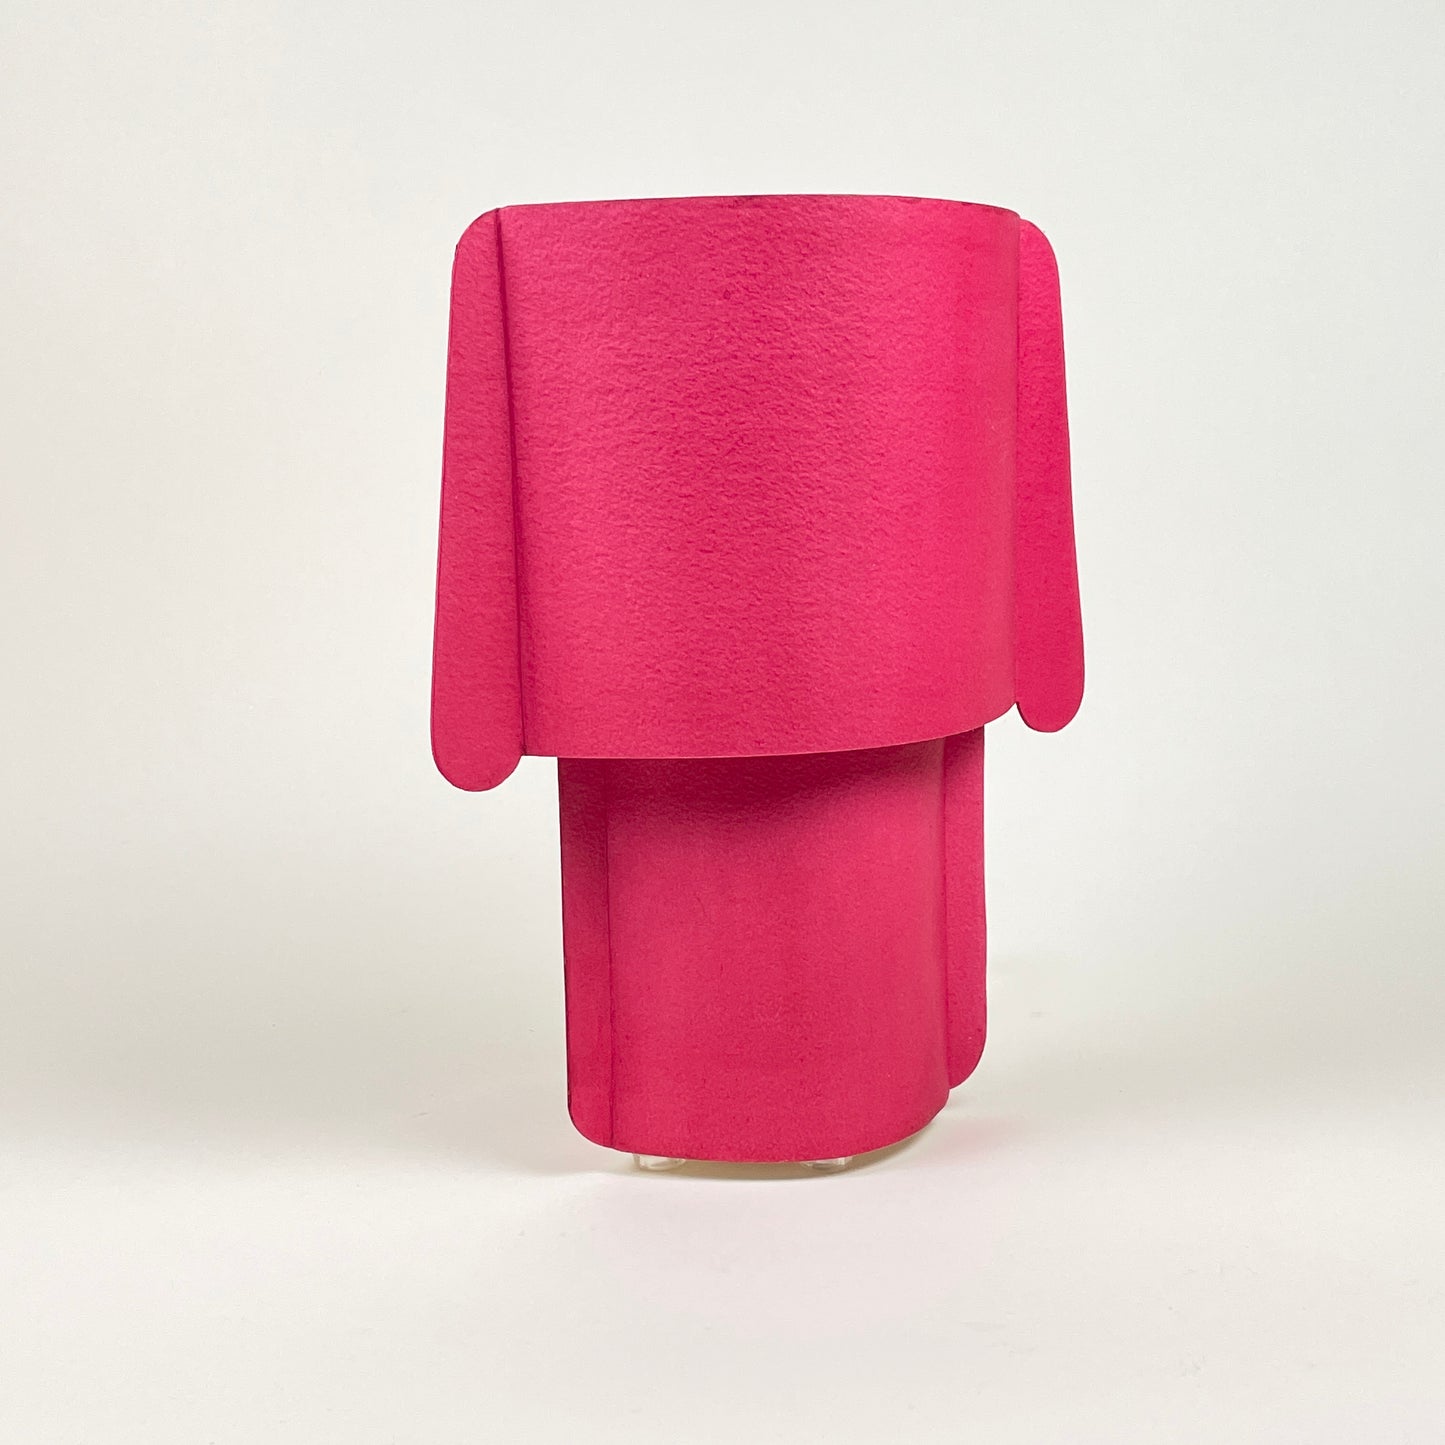 Hot pink Aquarelle Lamp by Adrian Bursell